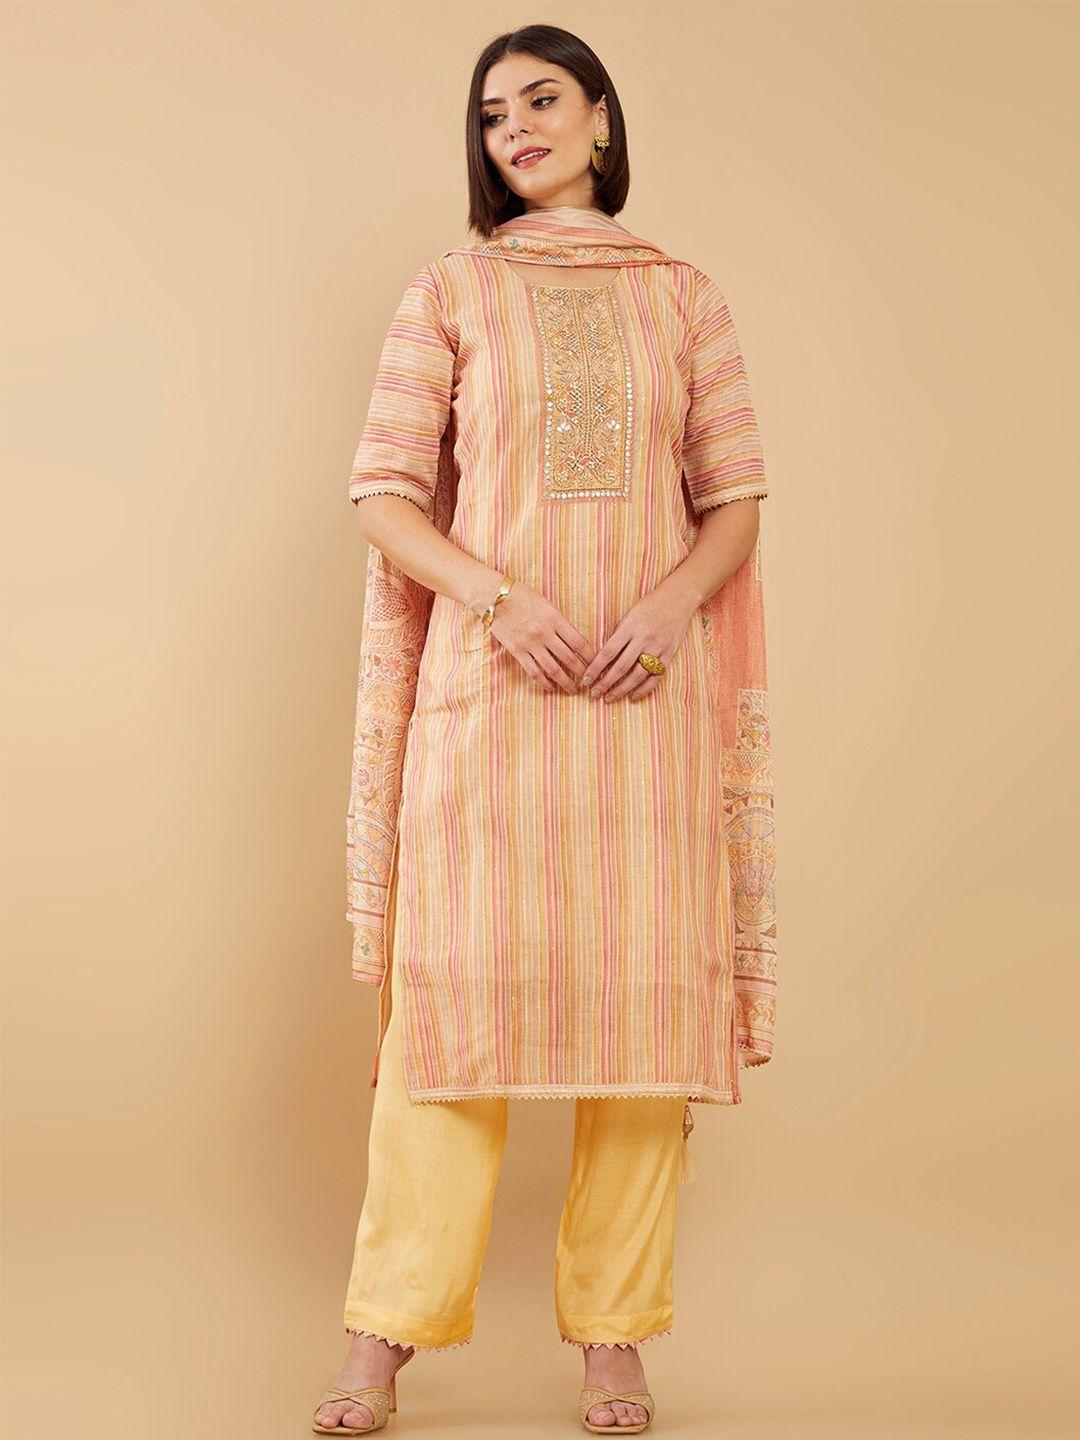 Soch Peach-Coloured & Cream-Coloured Printed Unstitched Dress Material